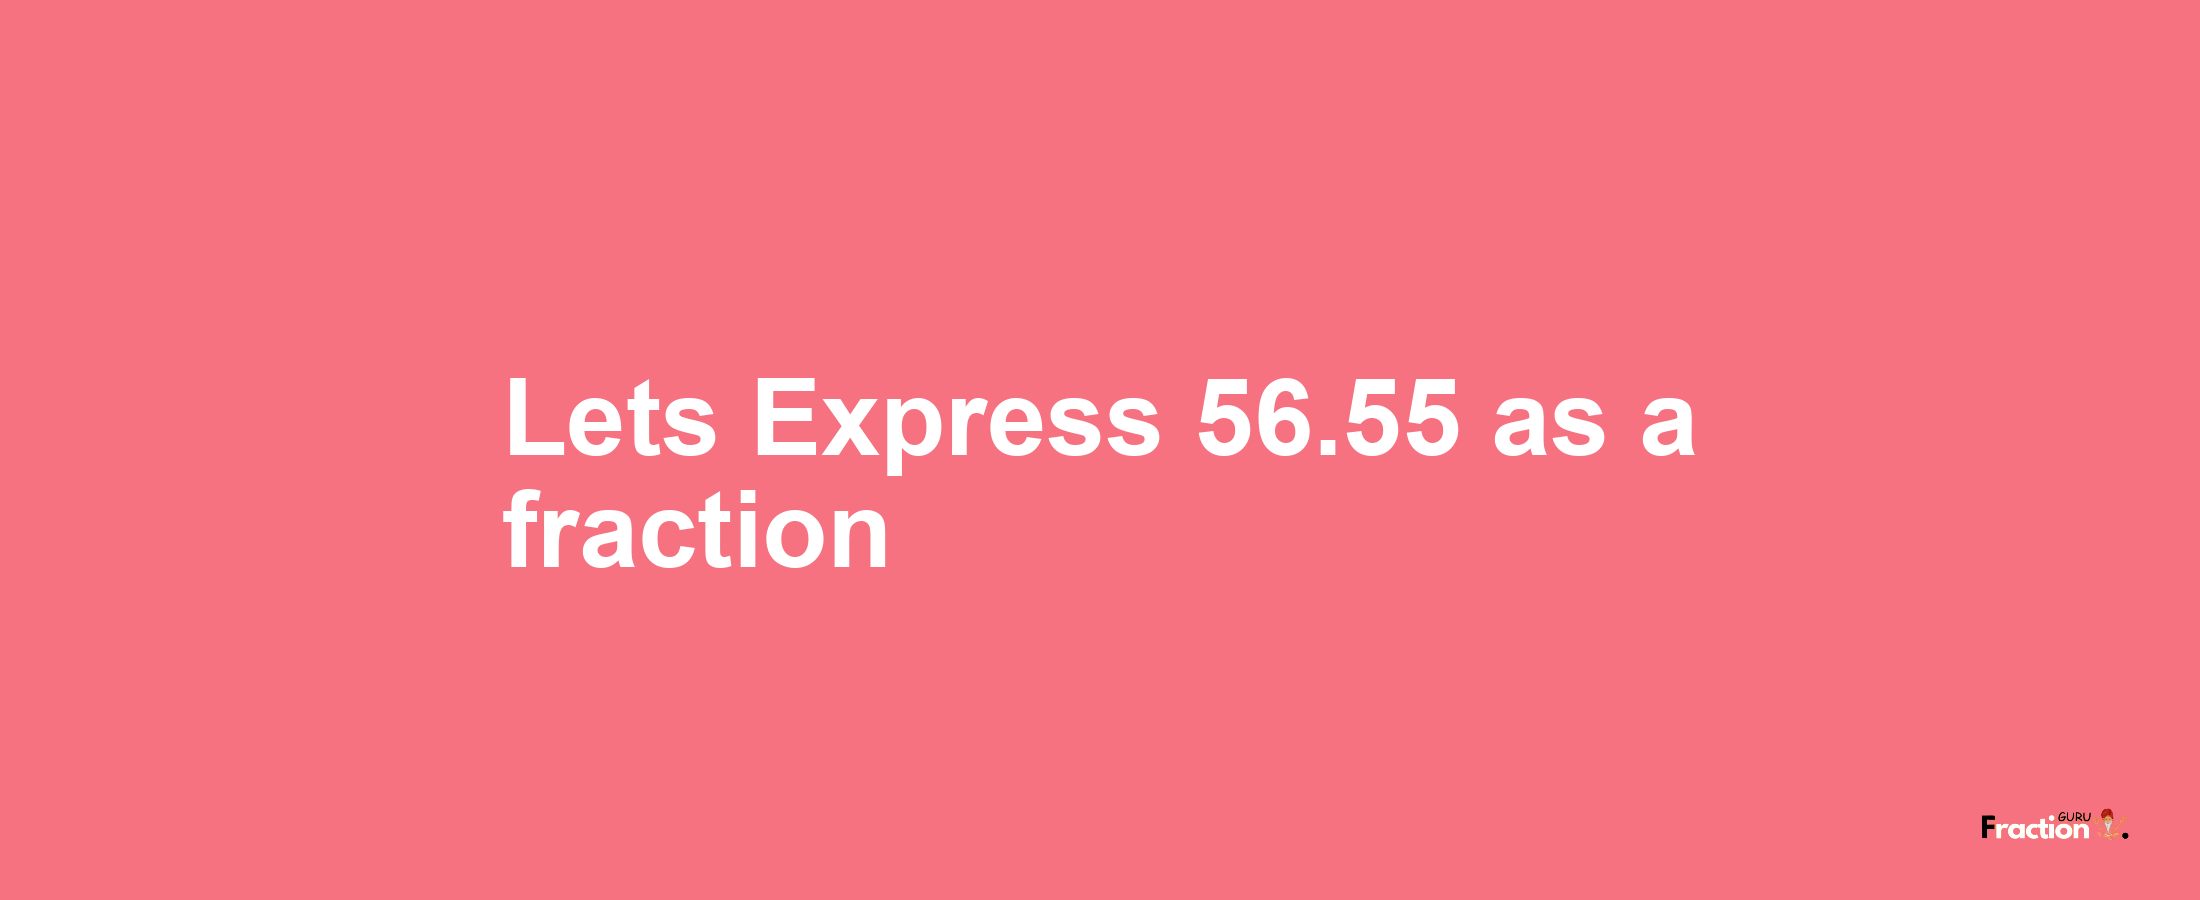 Lets Express 56.55 as afraction